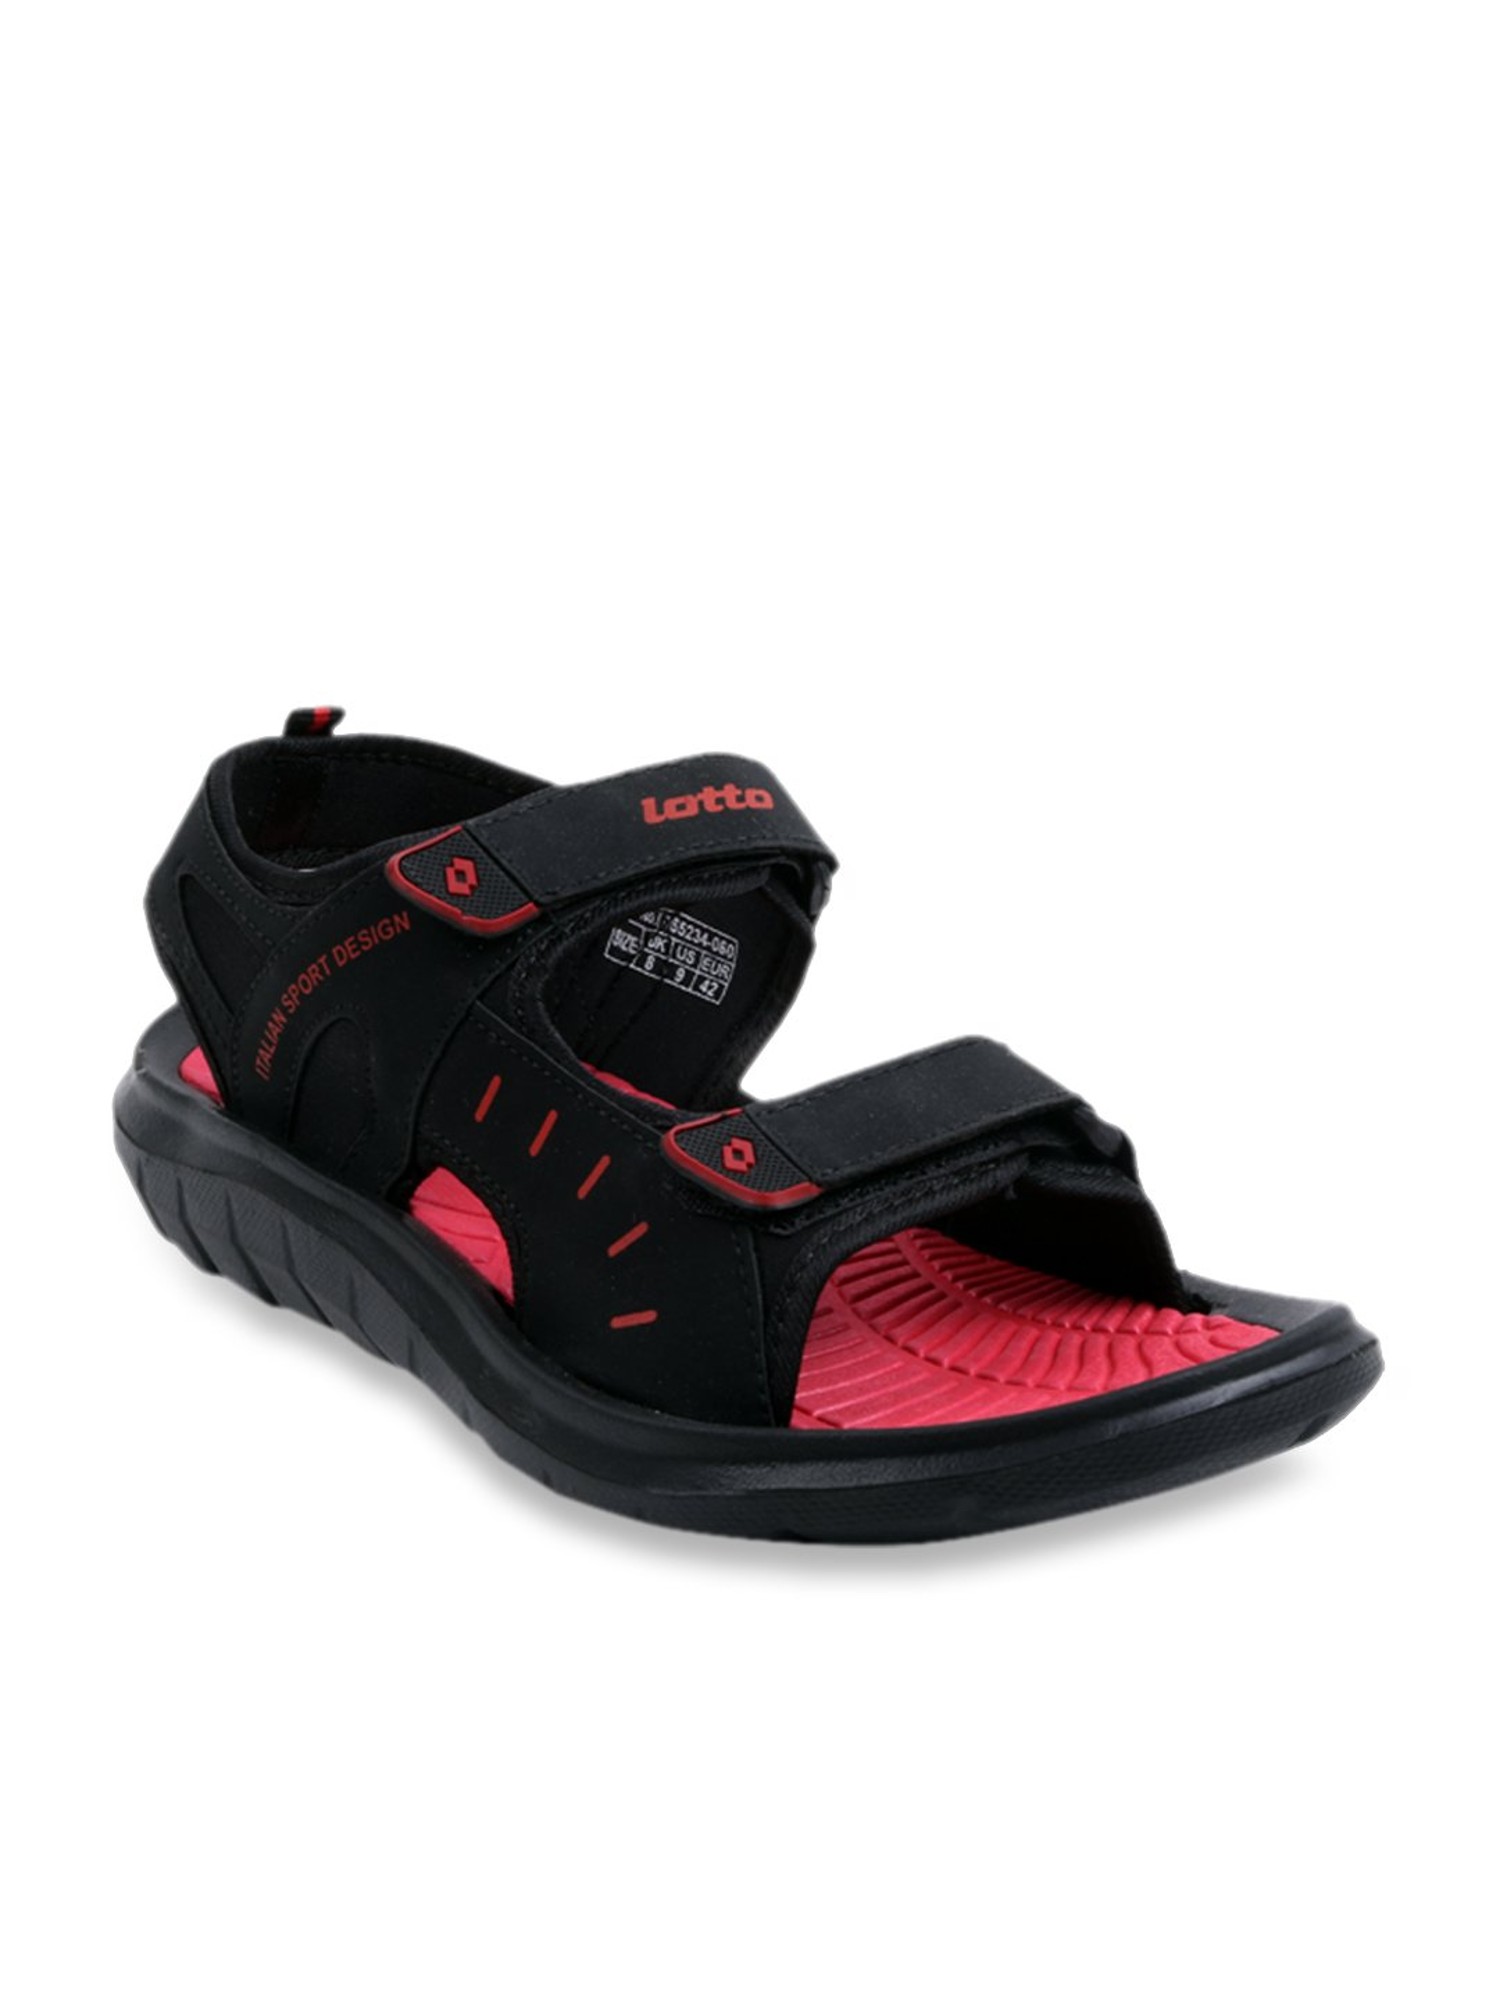 Express Hub - Lotto Sports Slippers for Men and Women-hautamhiepplus.vn